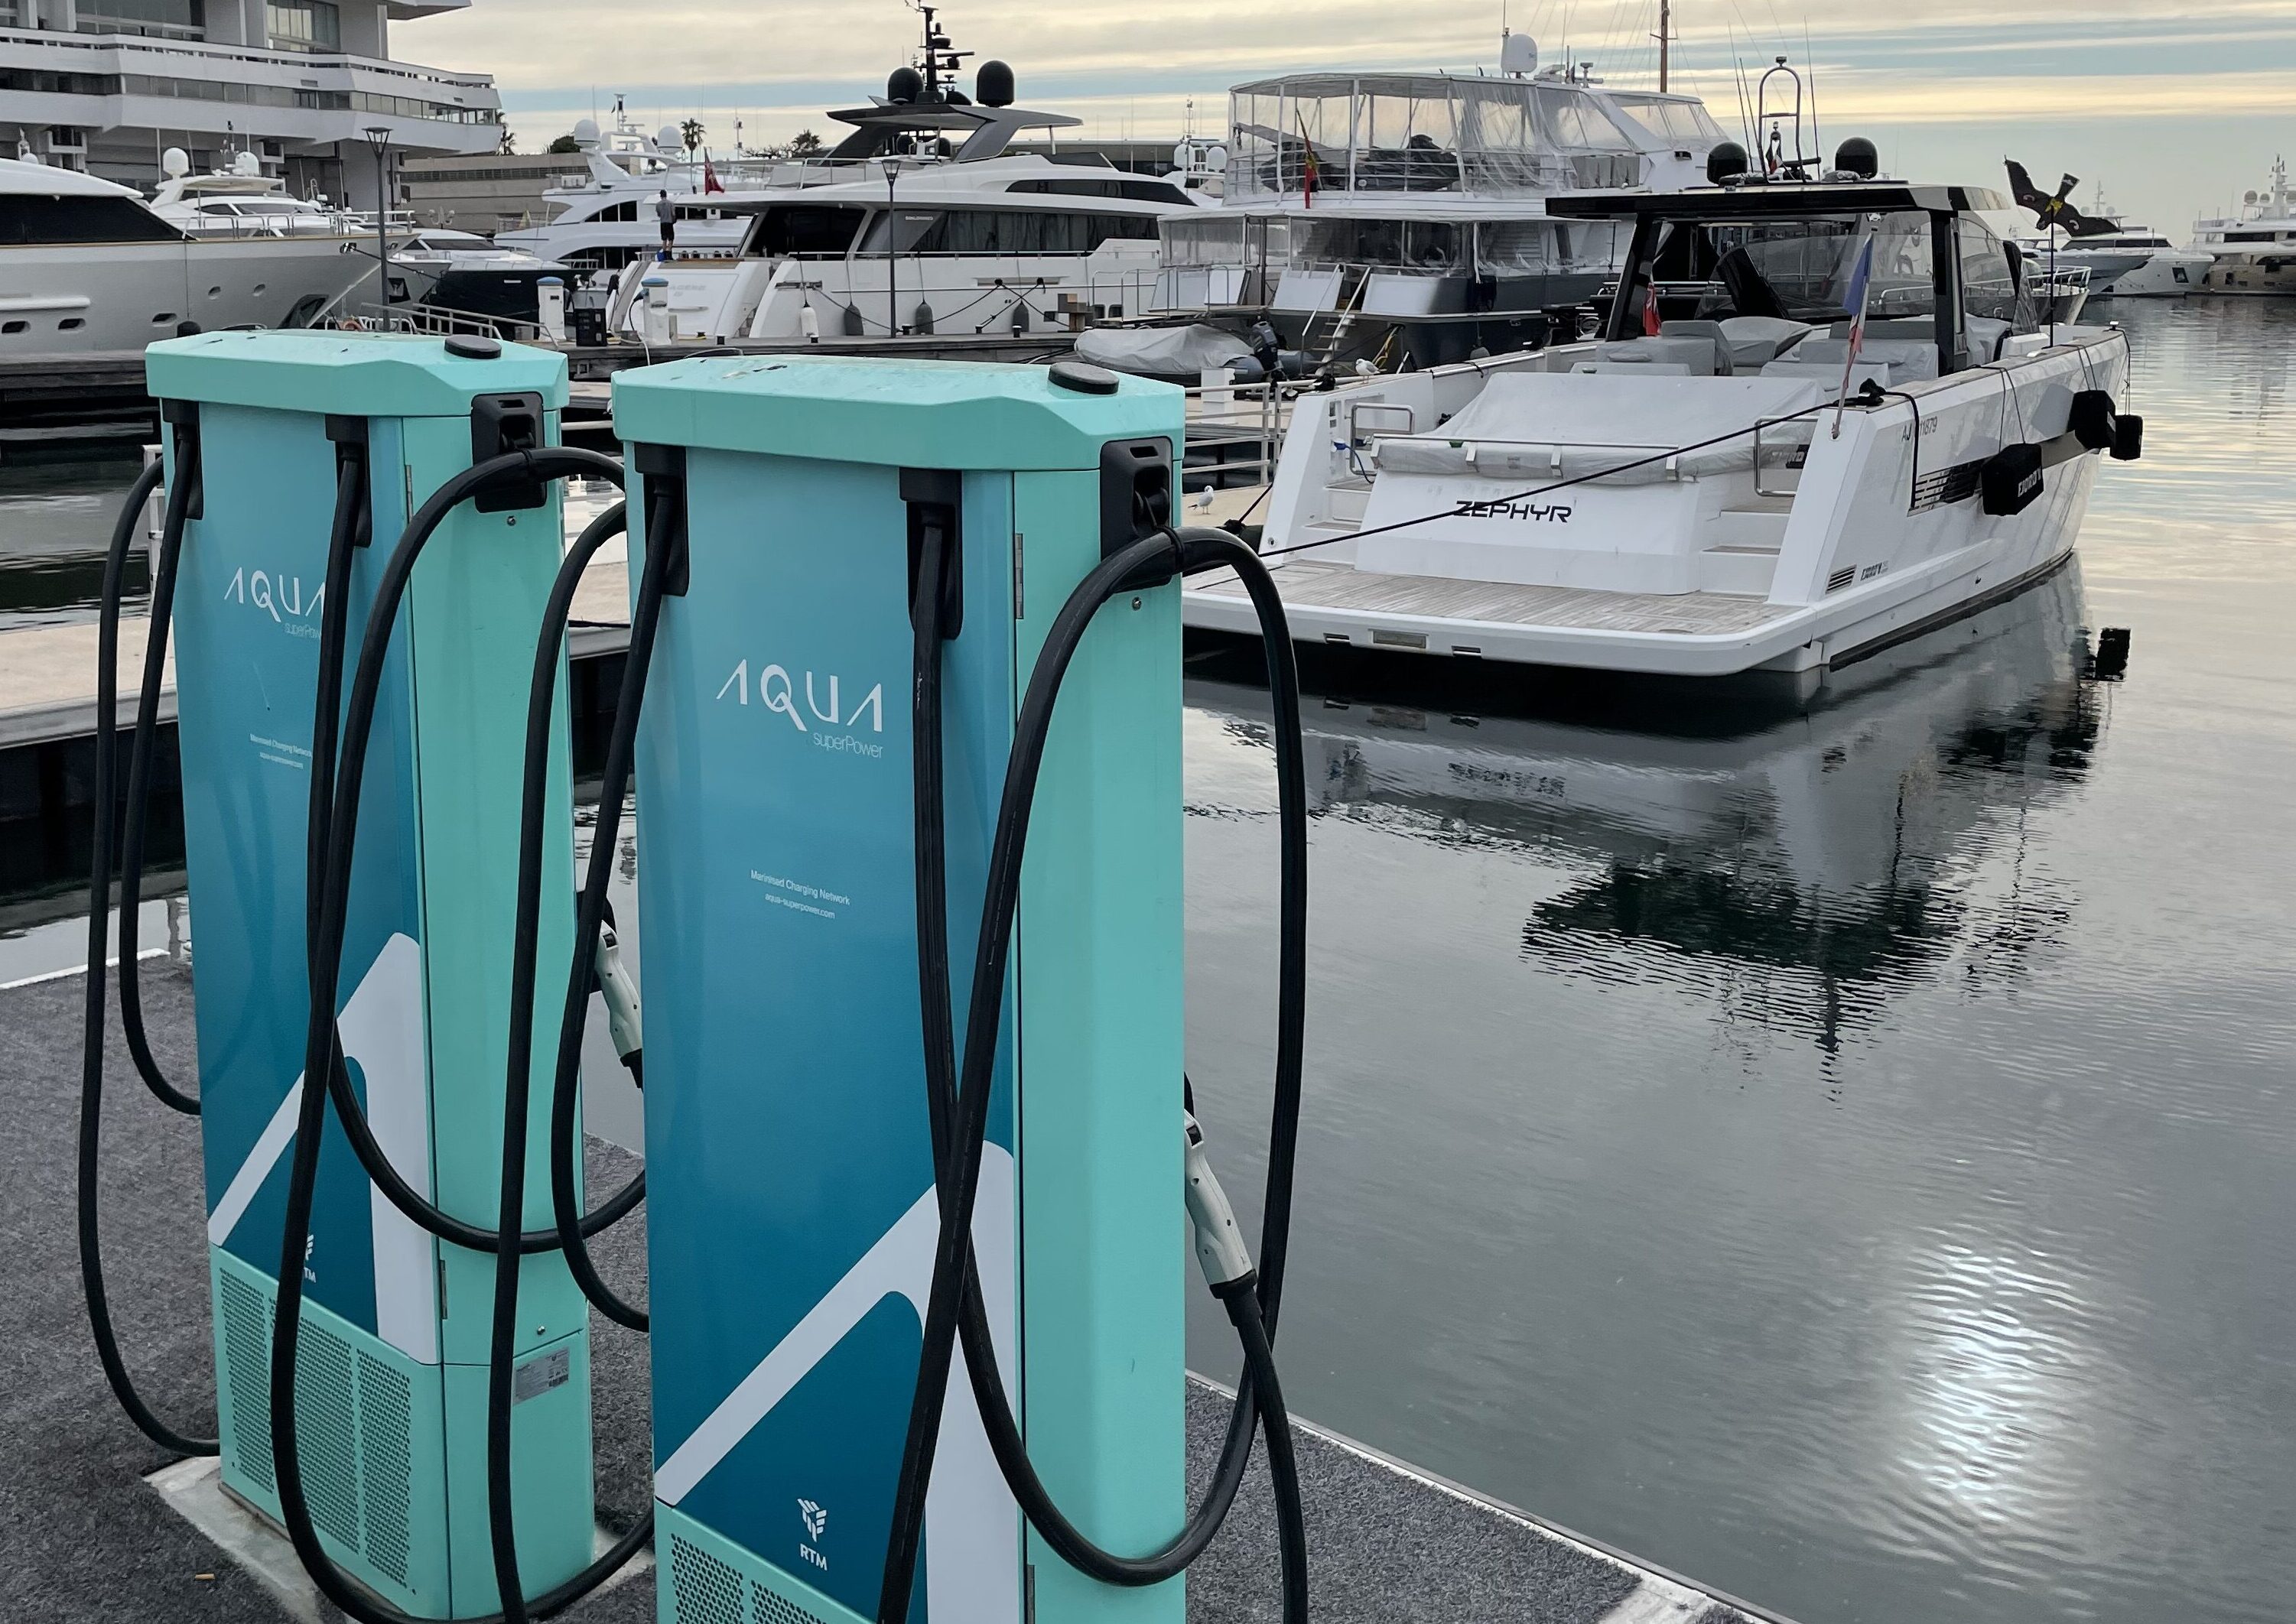 Electric boating: Aqua superPower expands in Marseilles - Marine ...